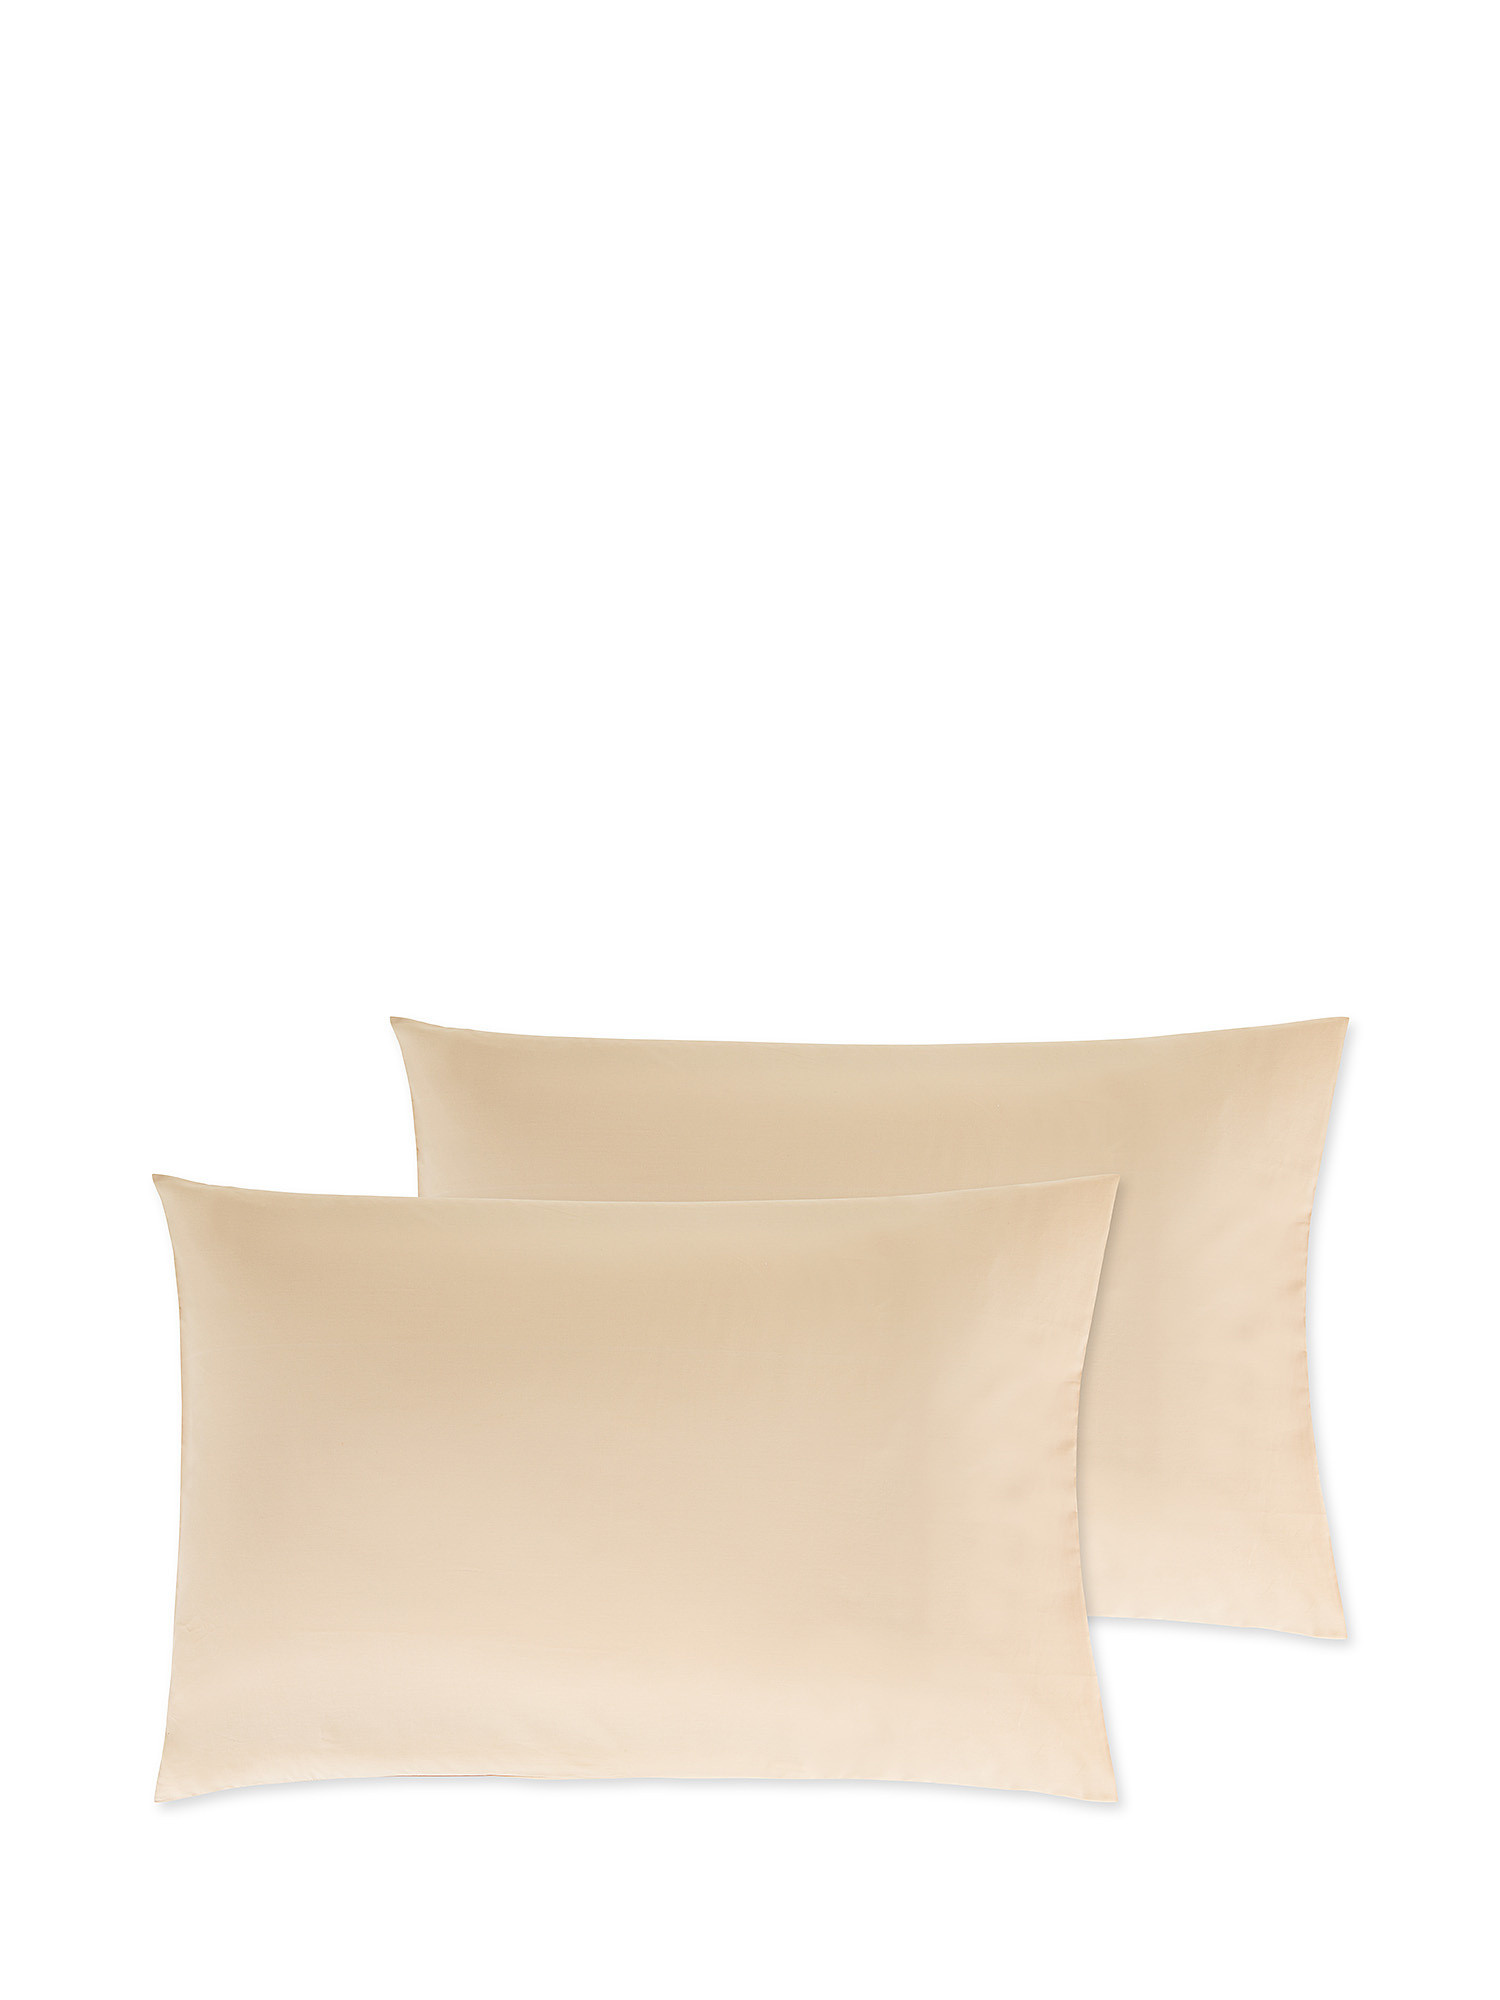 Set of 2 solid color percale cotton pillowcases, Beige, large image number 0